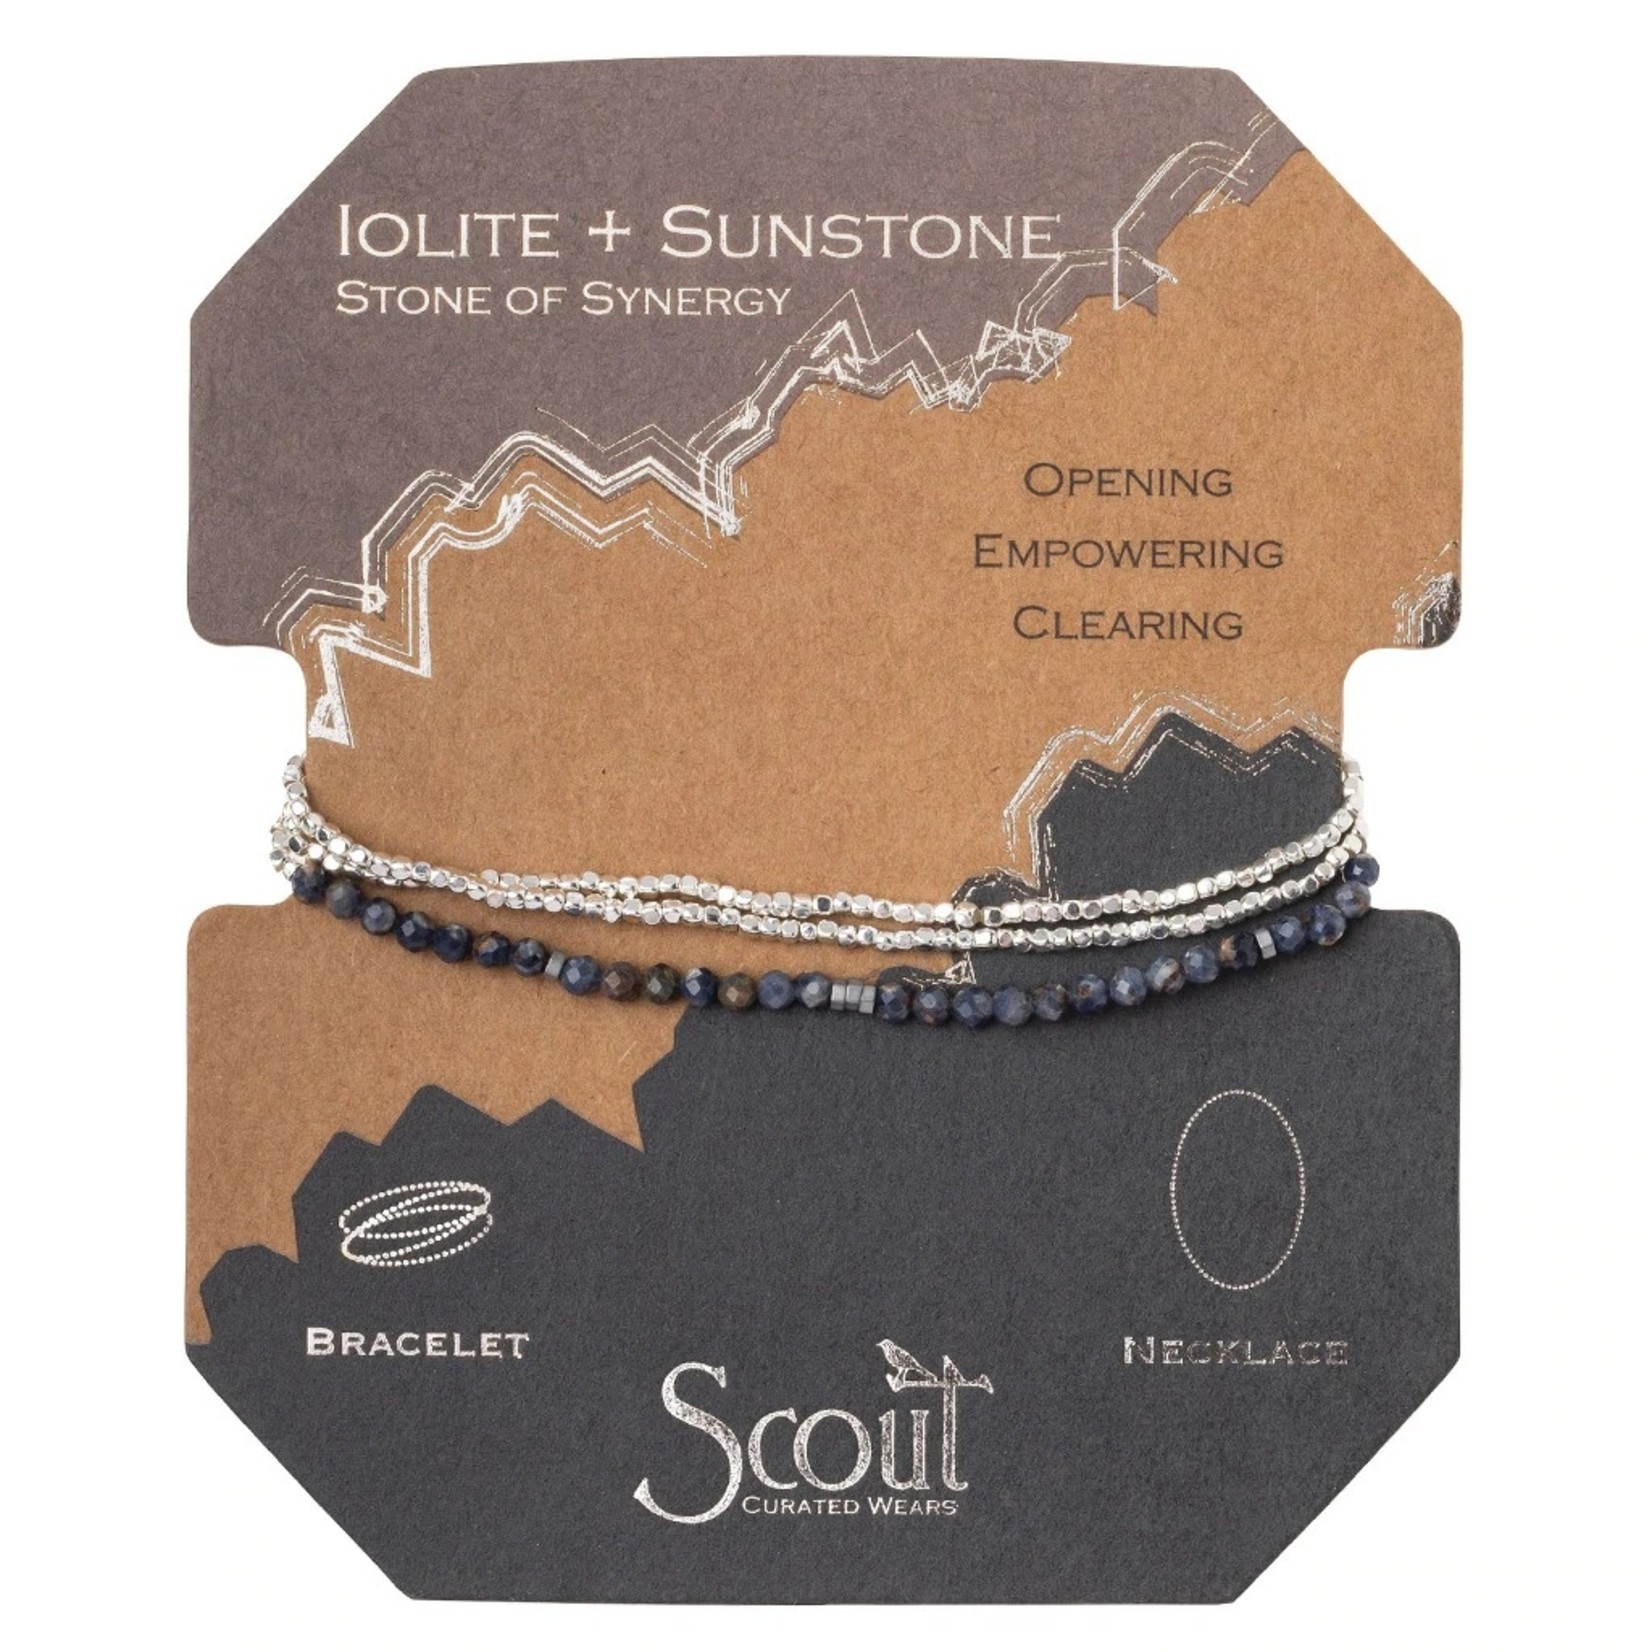 Scout Curated Wears Delicate Stone Bracelet/Necklace